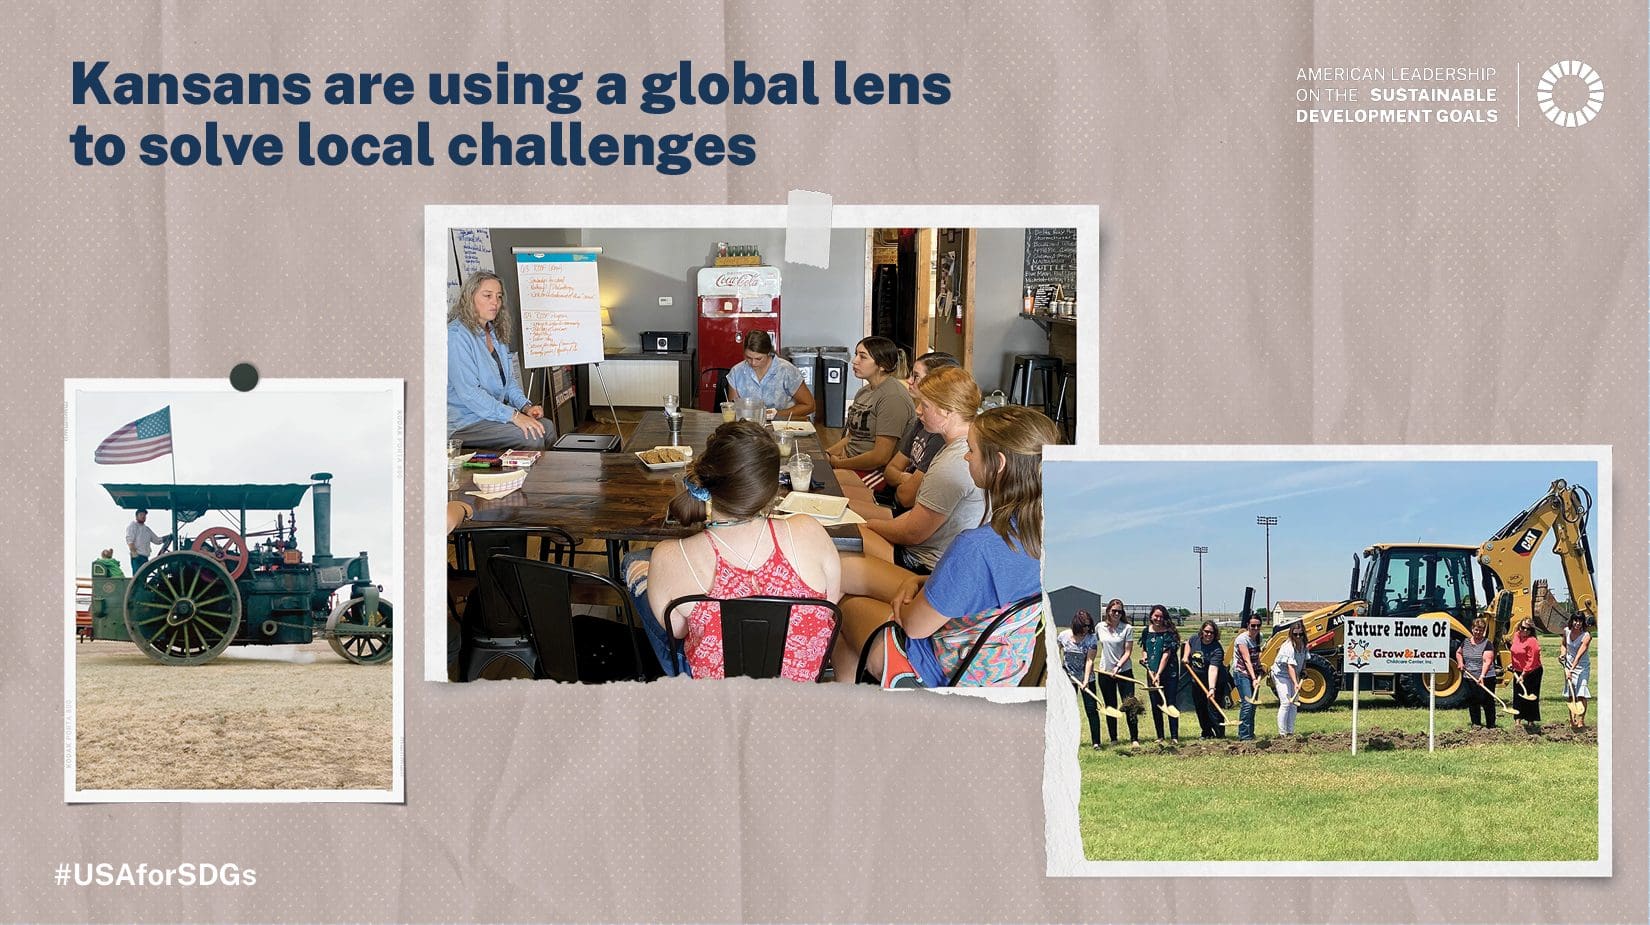 Three images laid out featuring a conductor on the front of a train, six students gathered around a table listening to an instructor, CEI members peforming a ground breaking in front of a tractor and textKansans are using a global lens to solve local challenges #USAforSDGs